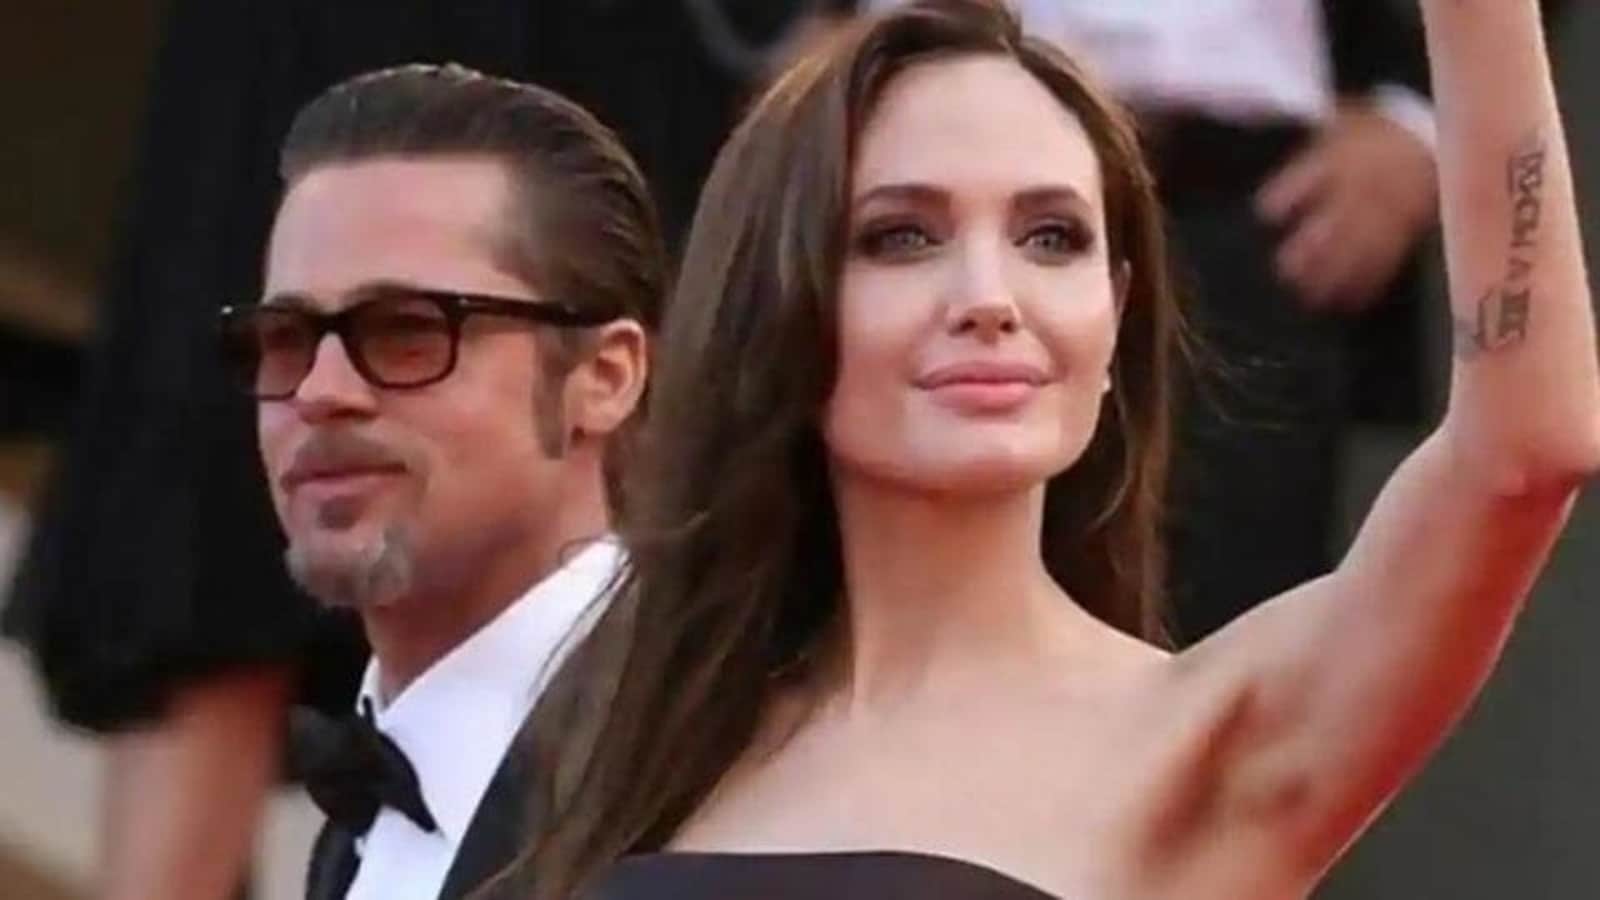 Angelina Jolie says 'change in family situation' after Brad Pitt split impacted career: 'I needed to do shorter jobs'